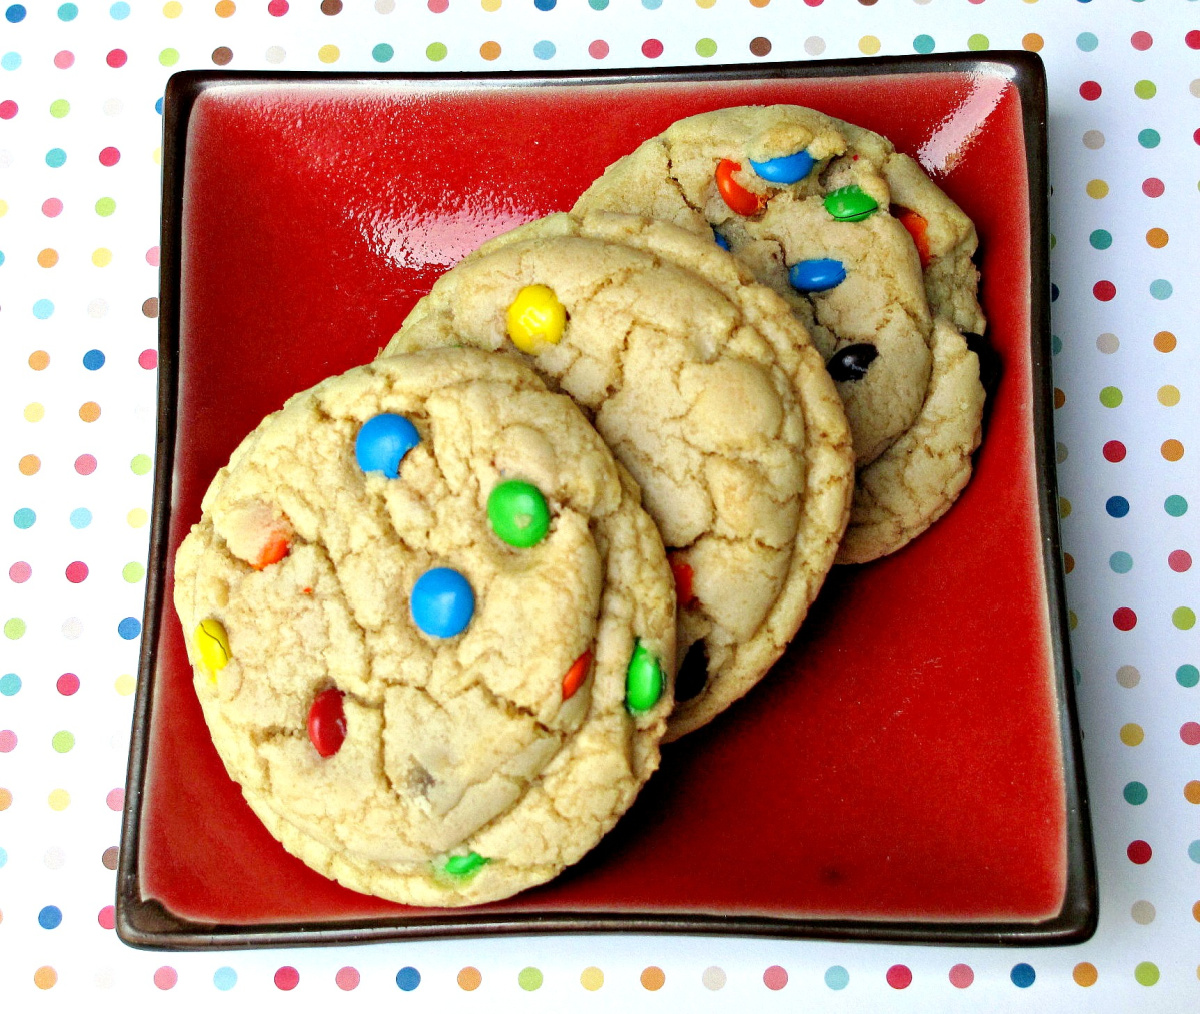 M and M cookies with a crackled top and mini m and m candies.